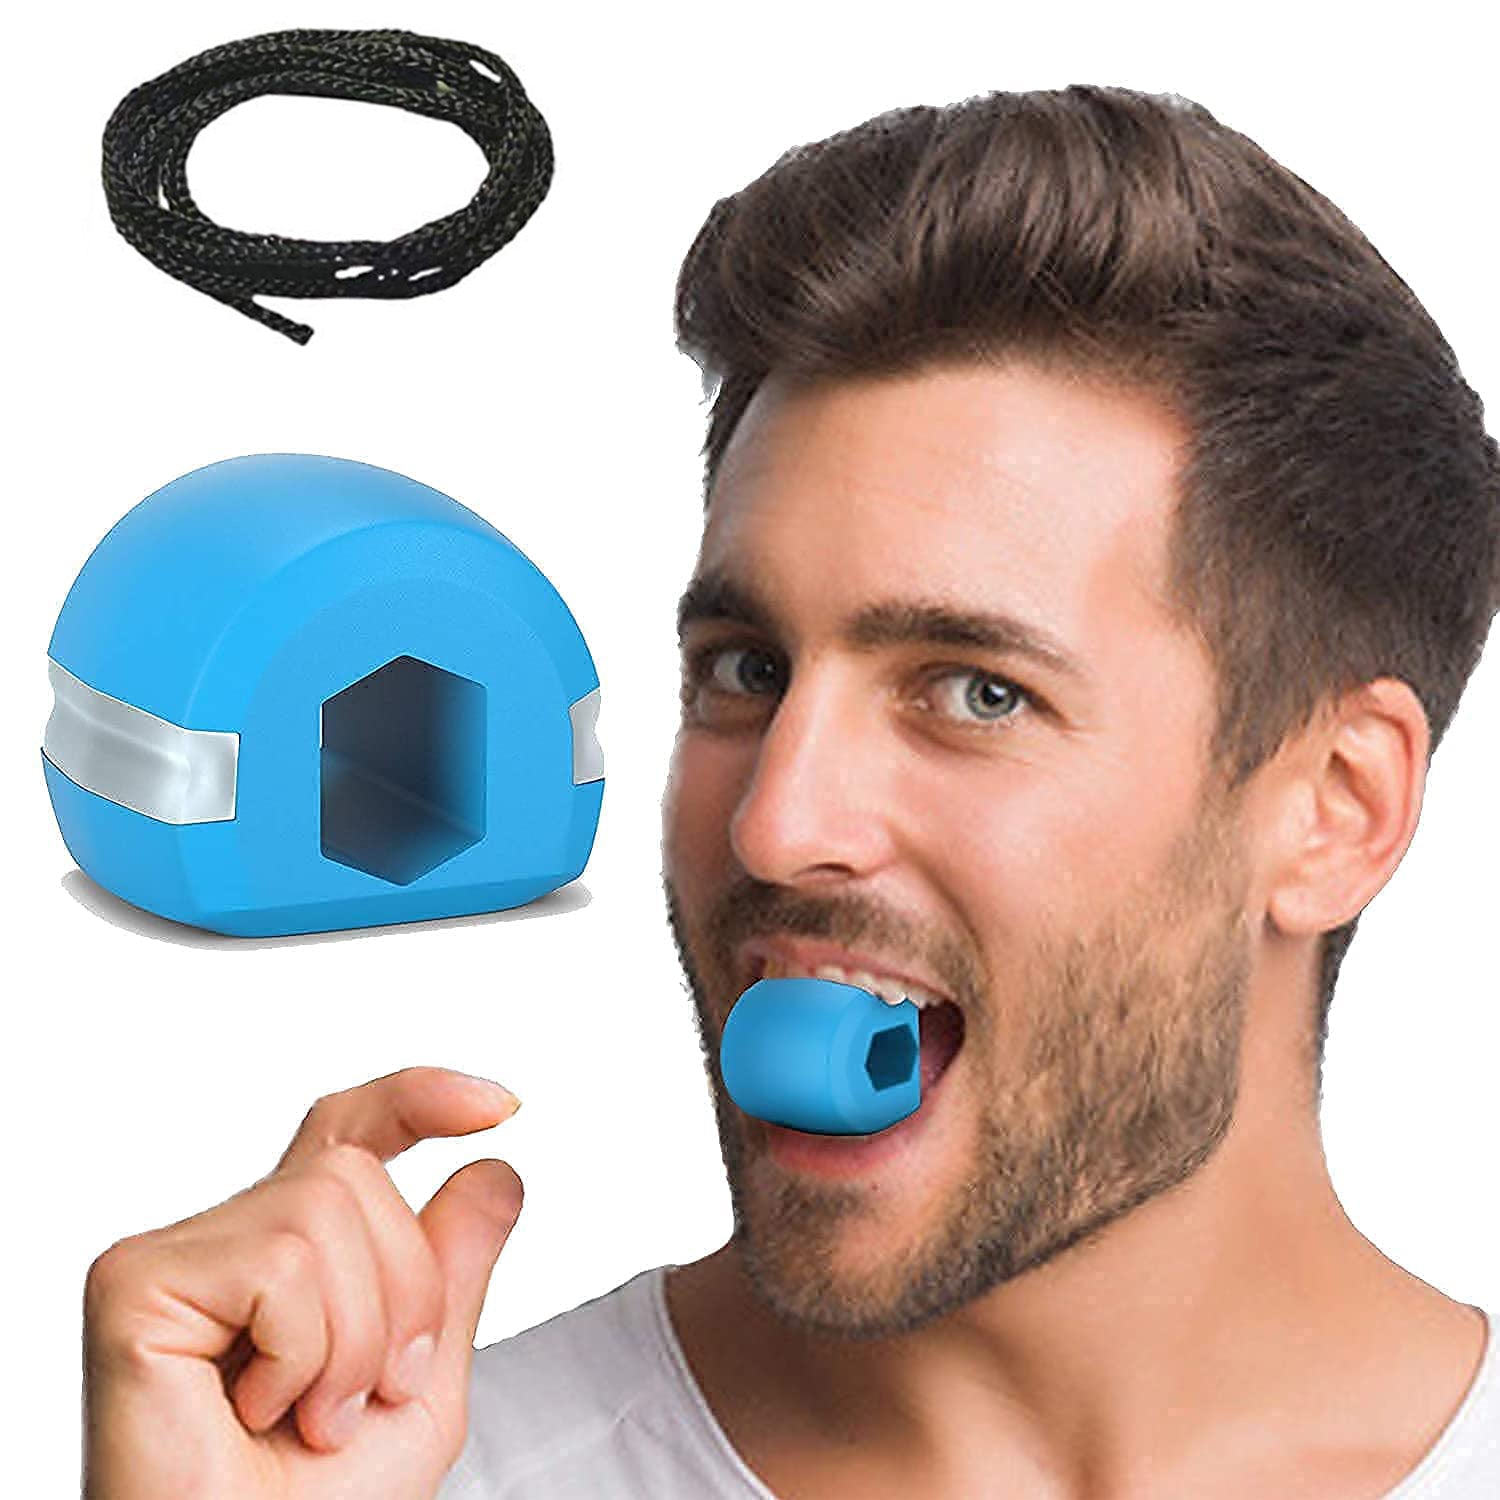 6128 DARK BLUE JAW EXERCISER USED TO GAIN SHARP AND CHISELLED JAWLINE EASILY AND FAST. DeoDap